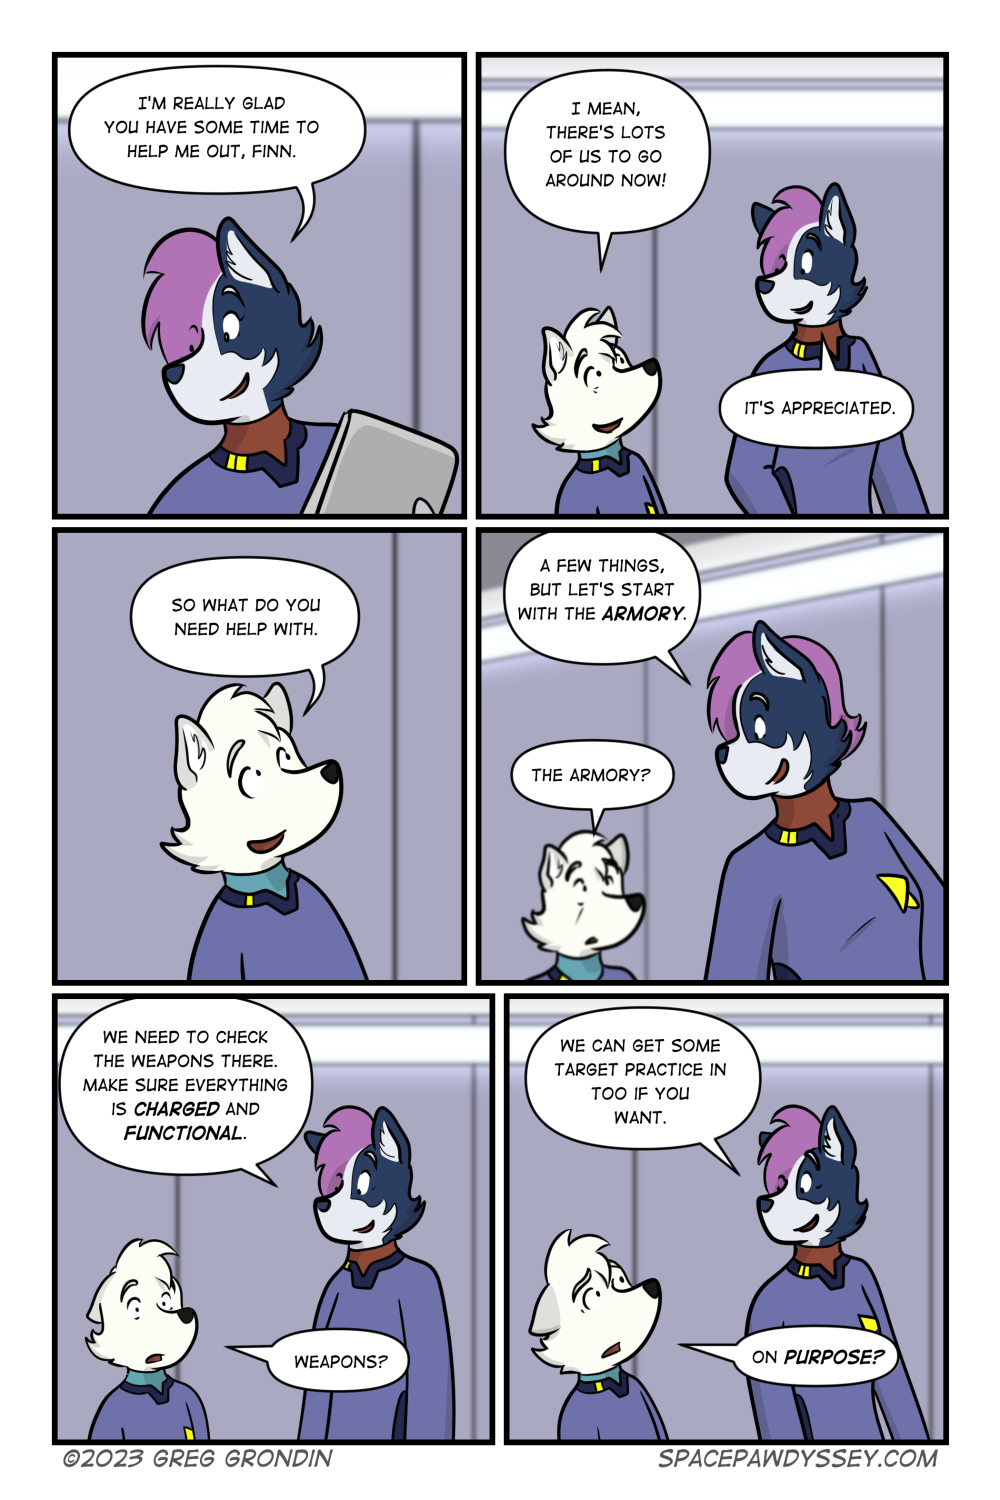 Space Pawdyssey #610